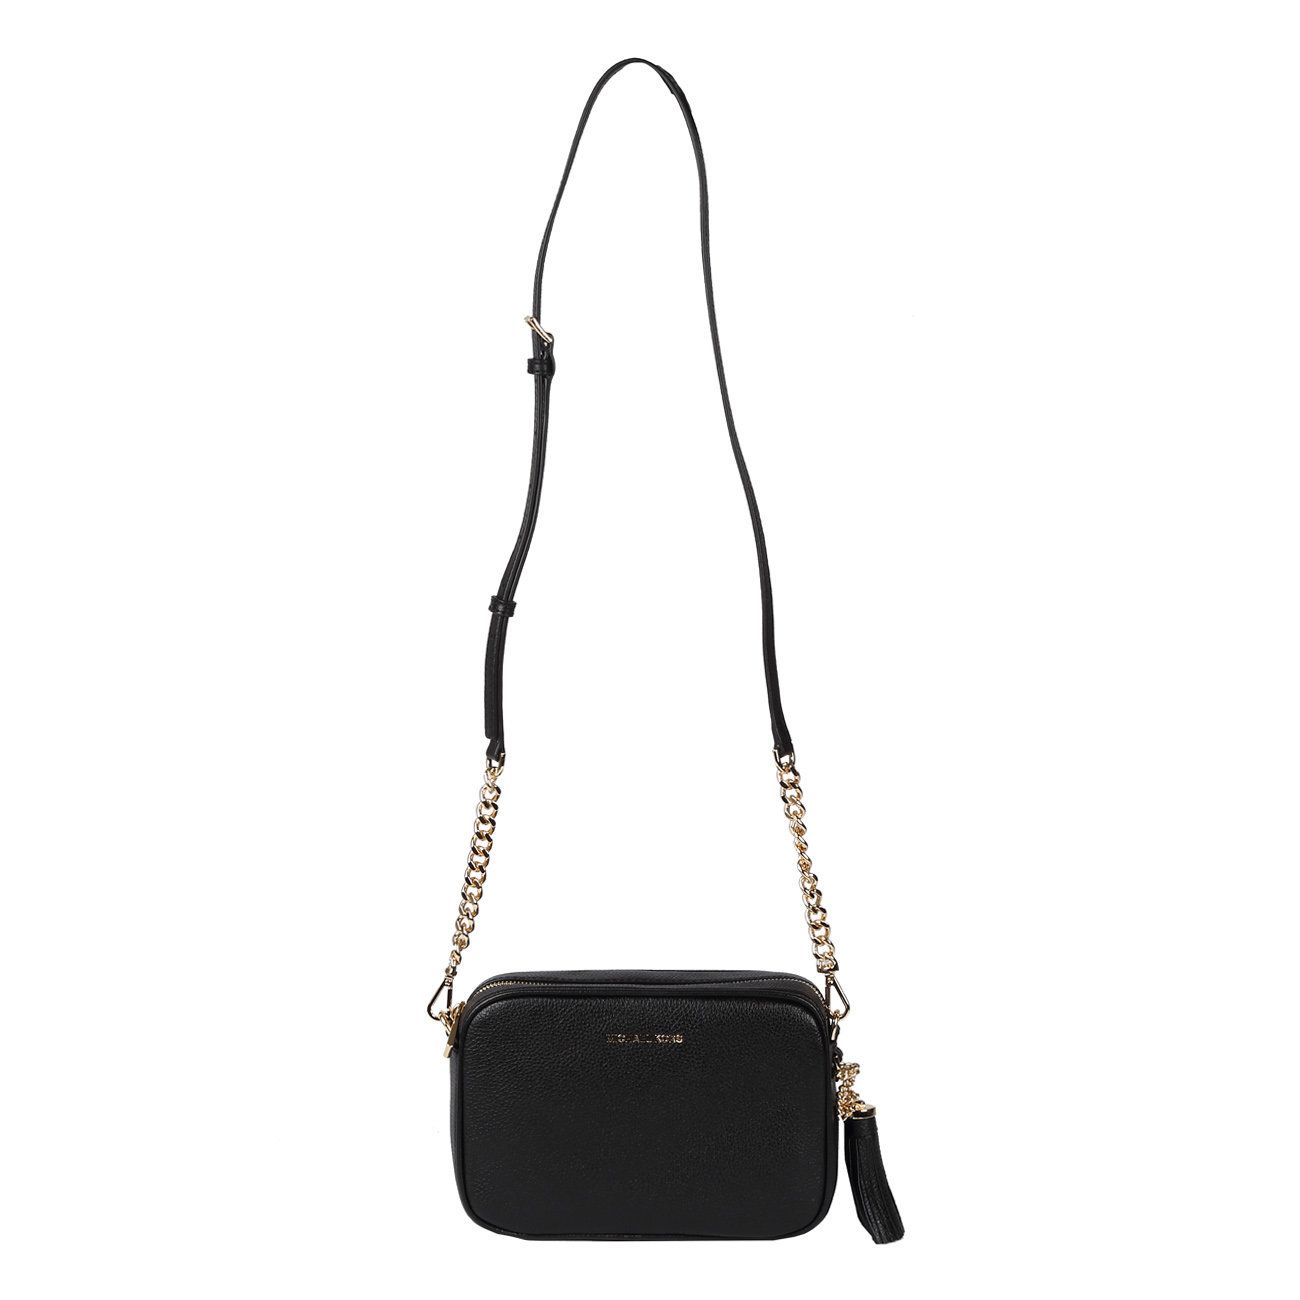 Michael Kors Ginny women's bag in grained leather Black